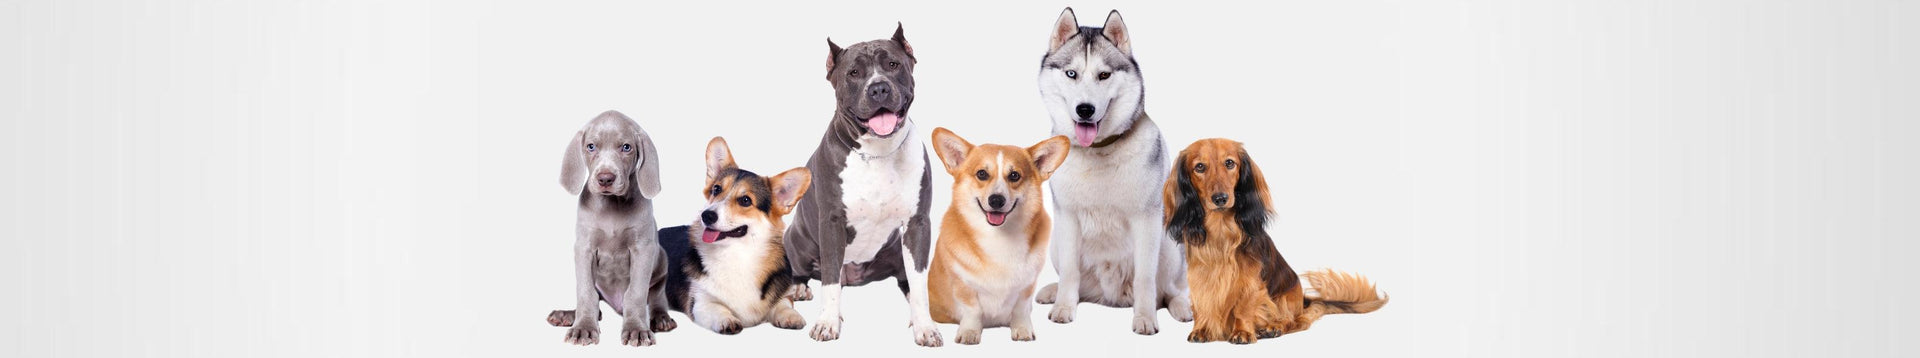 Hypoallergenic Range for Dogs - Raw Cut